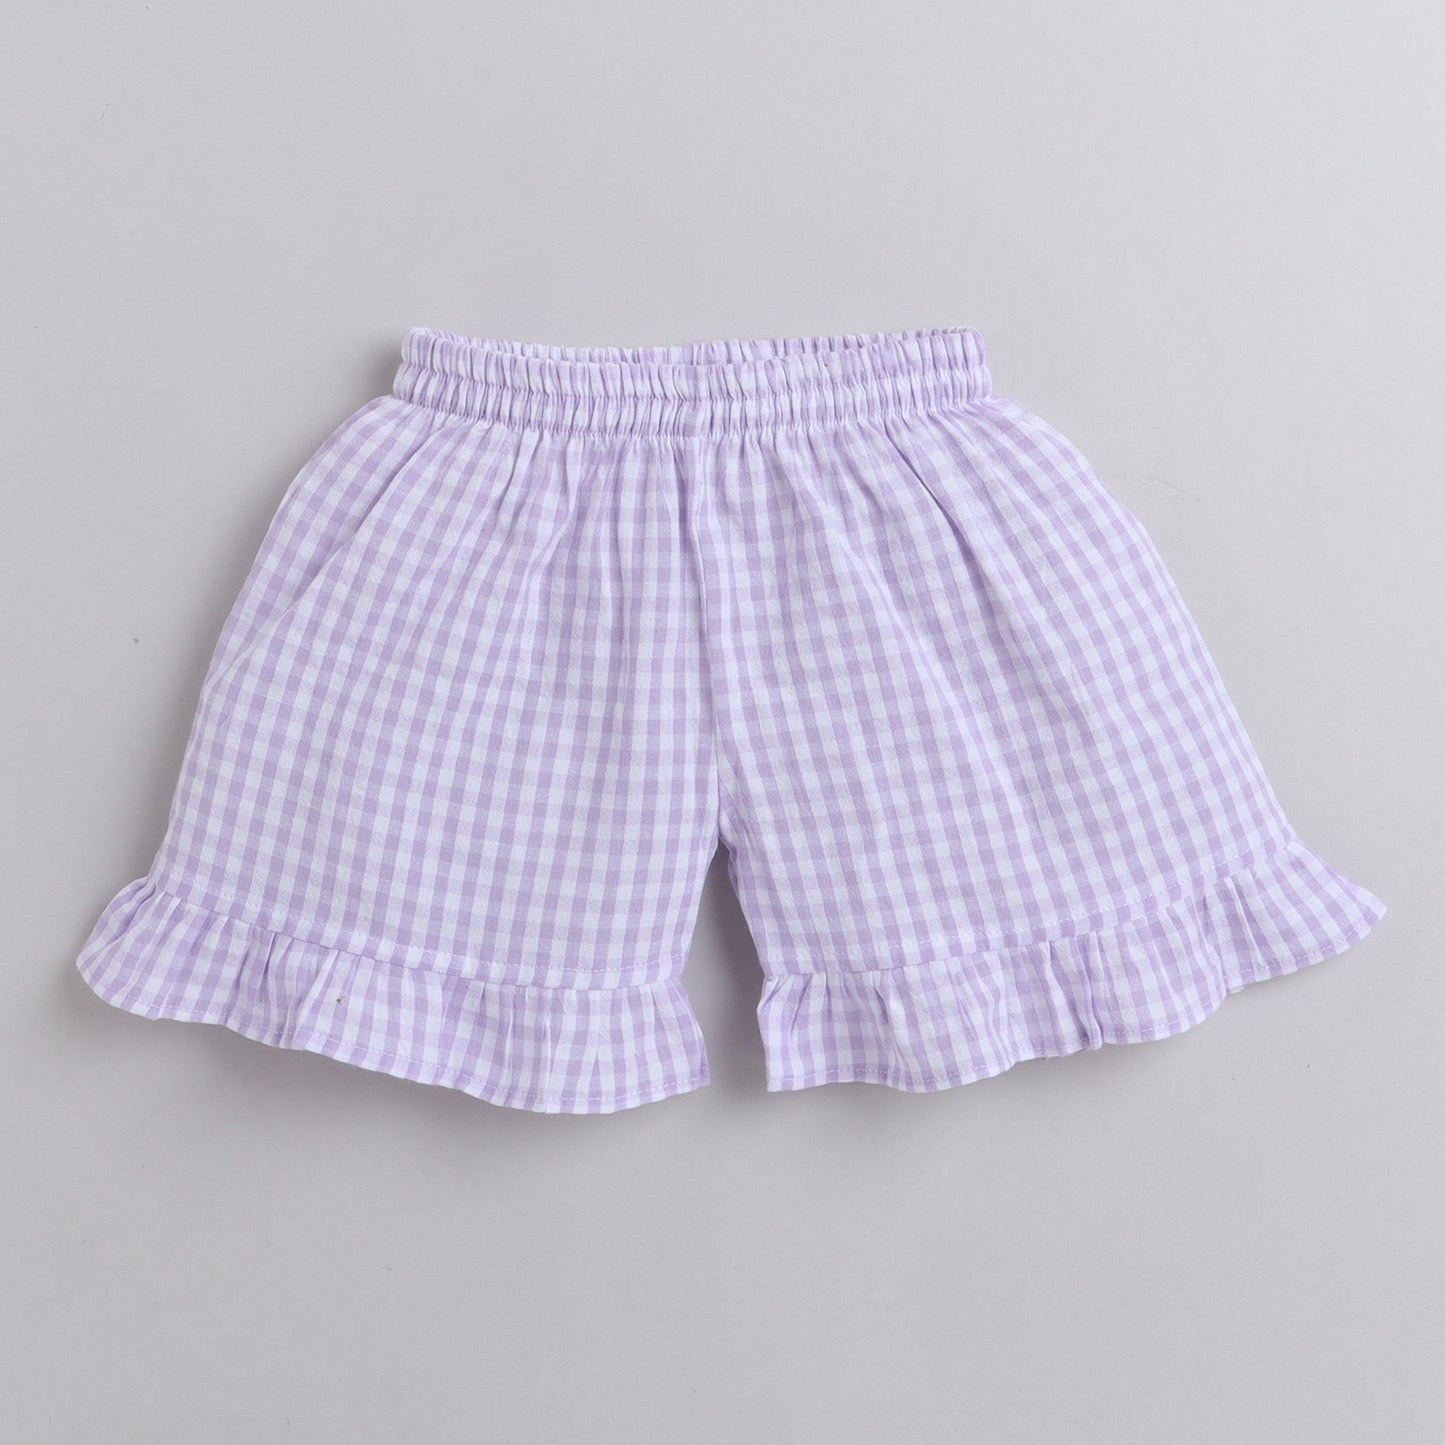 Purple And White Checks Coord Set With Shorts And Cute Princess Carriage Embroidery